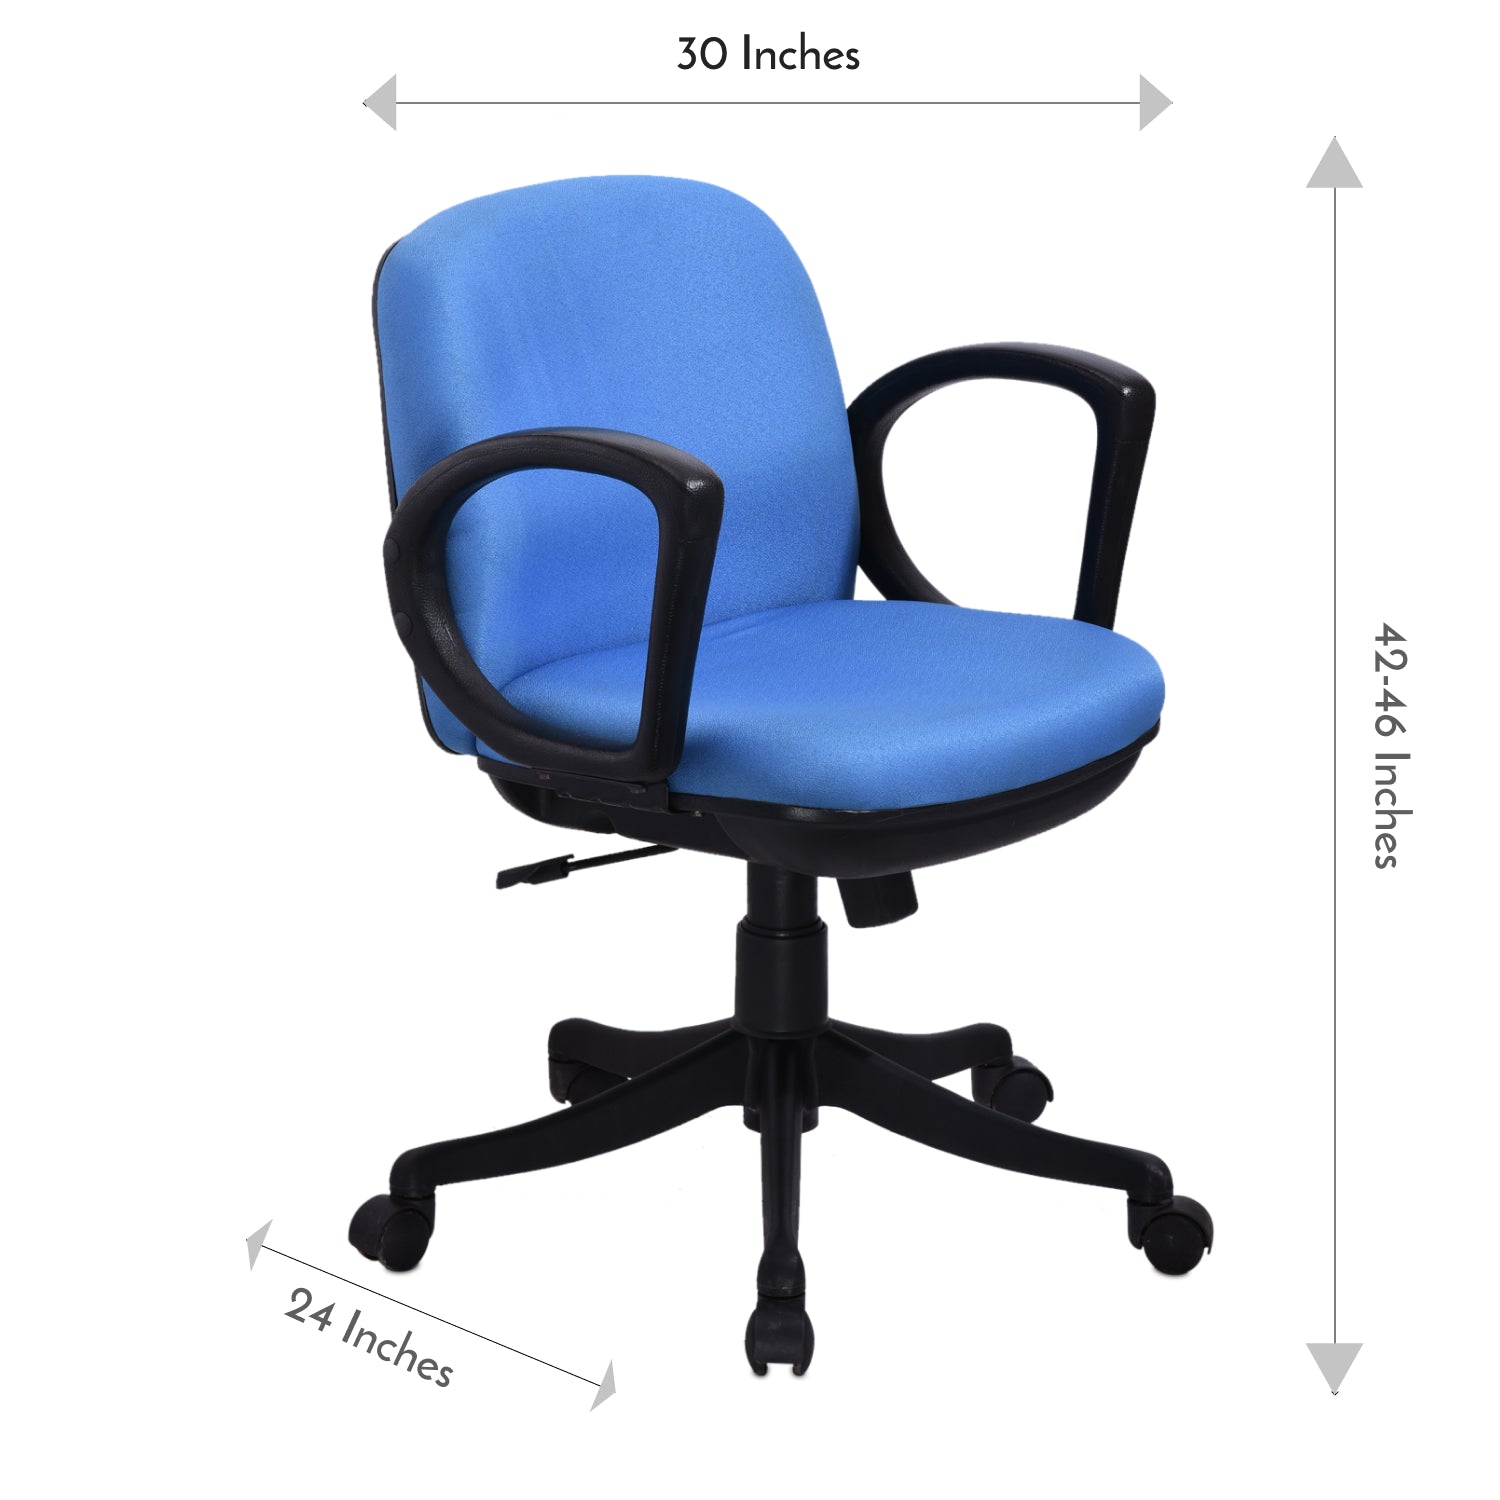 ZSE1027 Medium Back Chair by Zorin in Blue Color Zorin